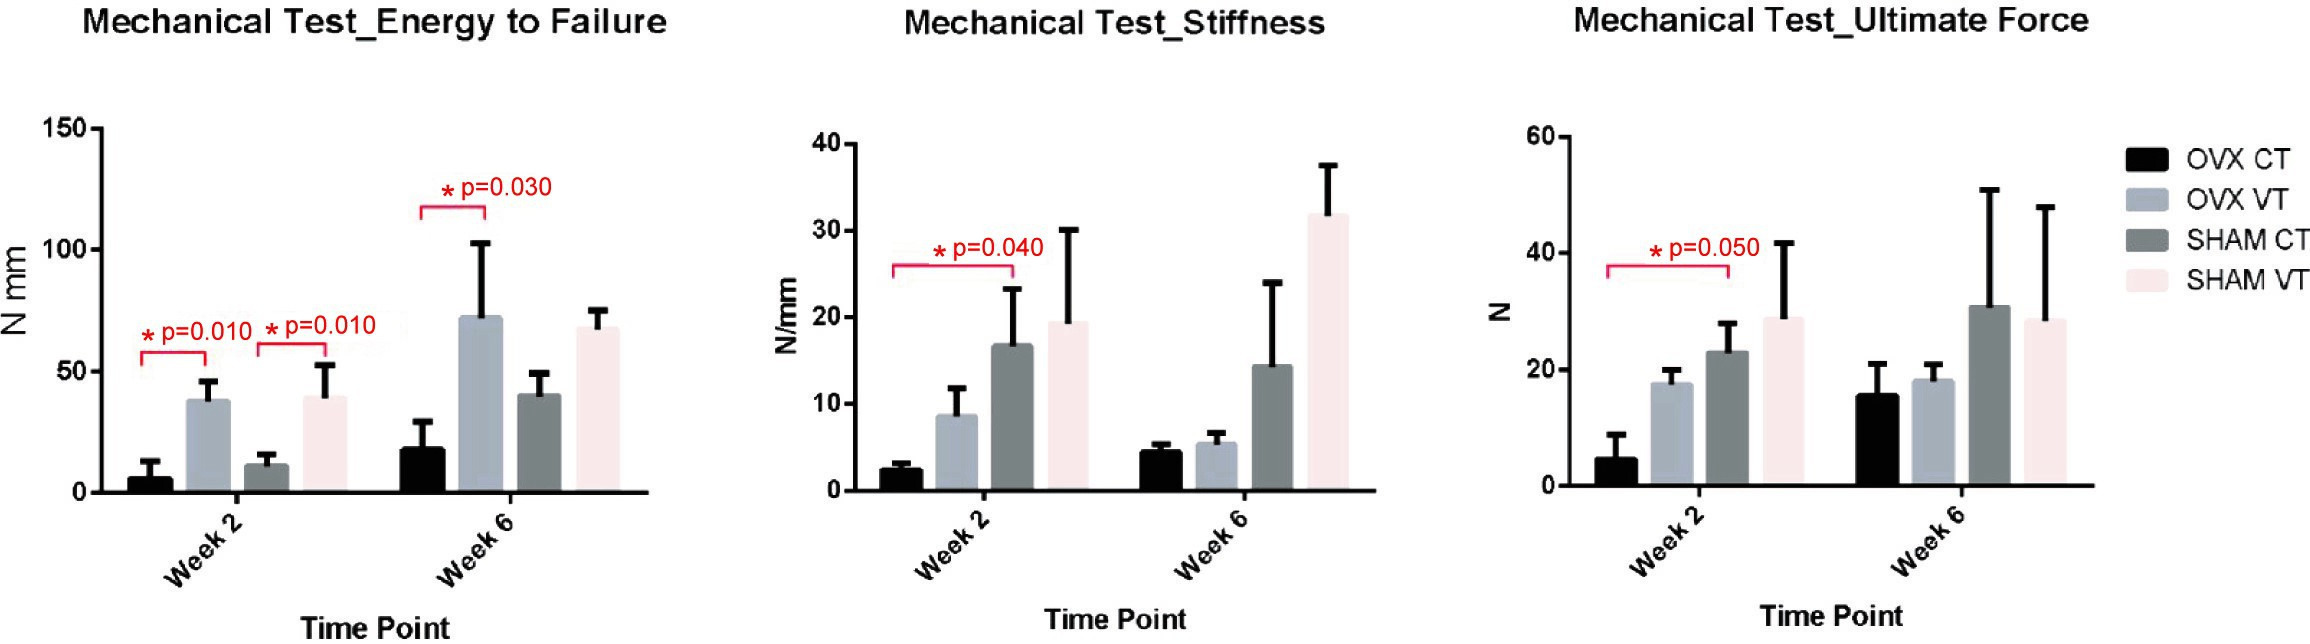 Fig. 4 
            Results of mechanical testing showed a significantly higher mean energy to failure for ovariectomized with low-magnitude high-frequency vibration (LMHFV) (OVX-VT) than ovariectomized-control (OVX-CT) at week 2 and week 6, and Sham with LMHFV (Sham-VT) than Sham-control (Sham-CT) at week 2. Statisical significance was also detected in stiffness and ultimate force between the OVX-CT and Sham-CT groups. *p < 0.050, one-way analysis of variance with post-hoc Bonferroni test.
          